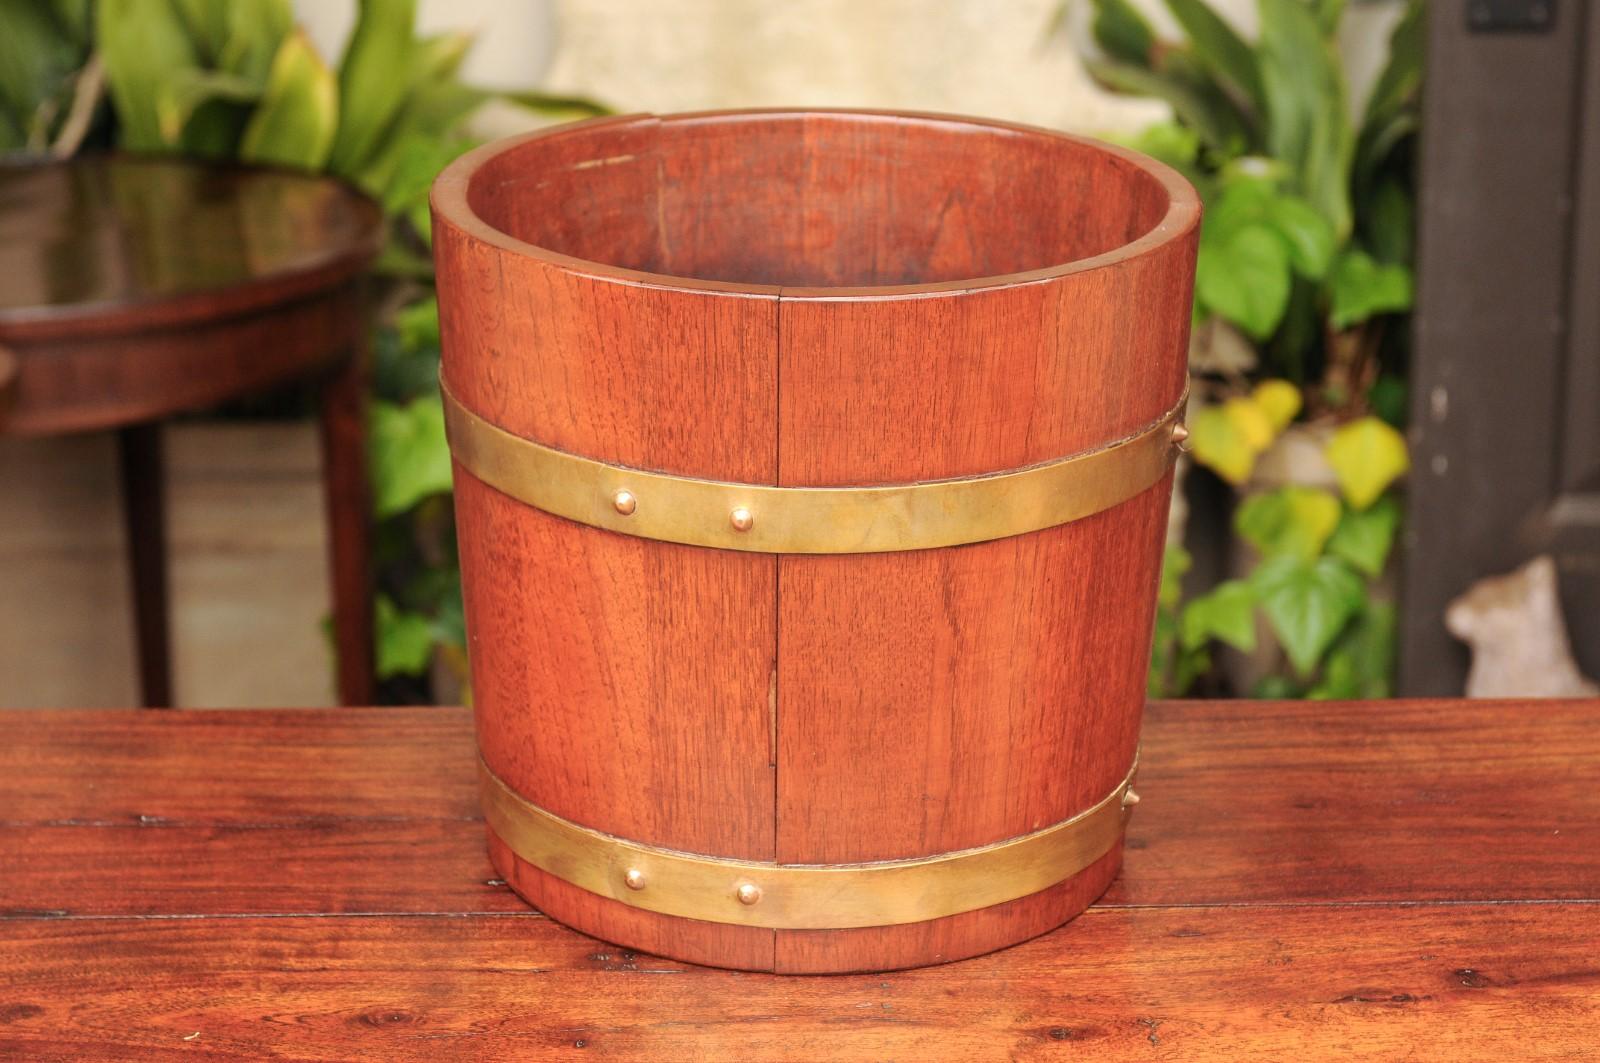 English 1900s Edwardian Period R.A Lister & Co. Oak Bucket with Brass Braces For Sale 4